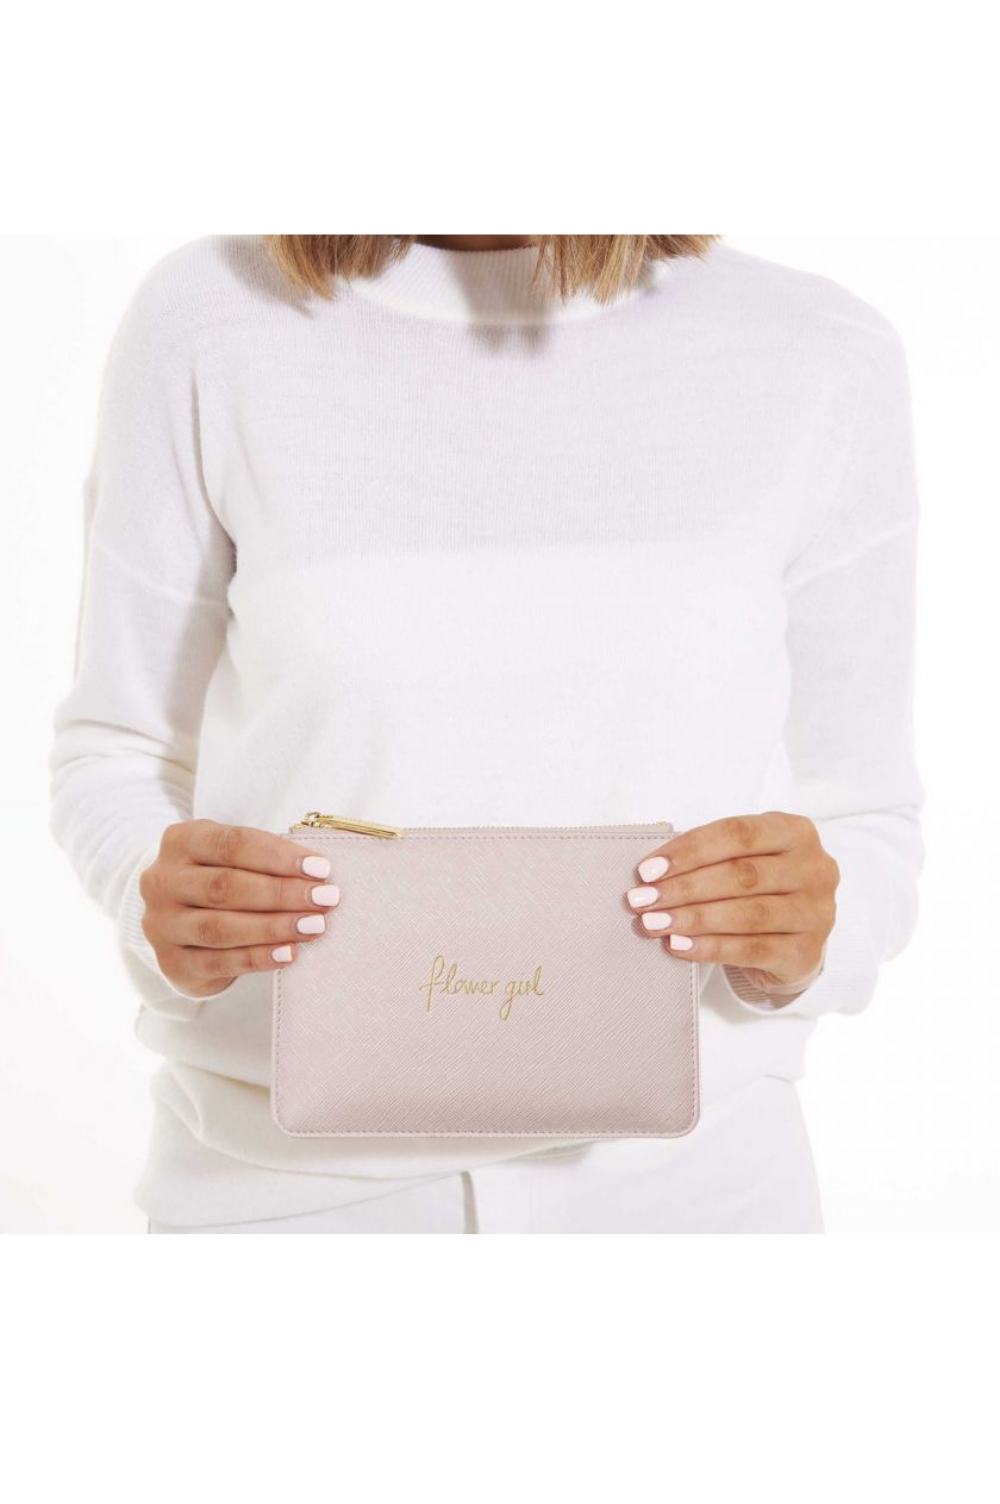 Katie Loxton 'Flower Girl' Petite Perfect Pouch